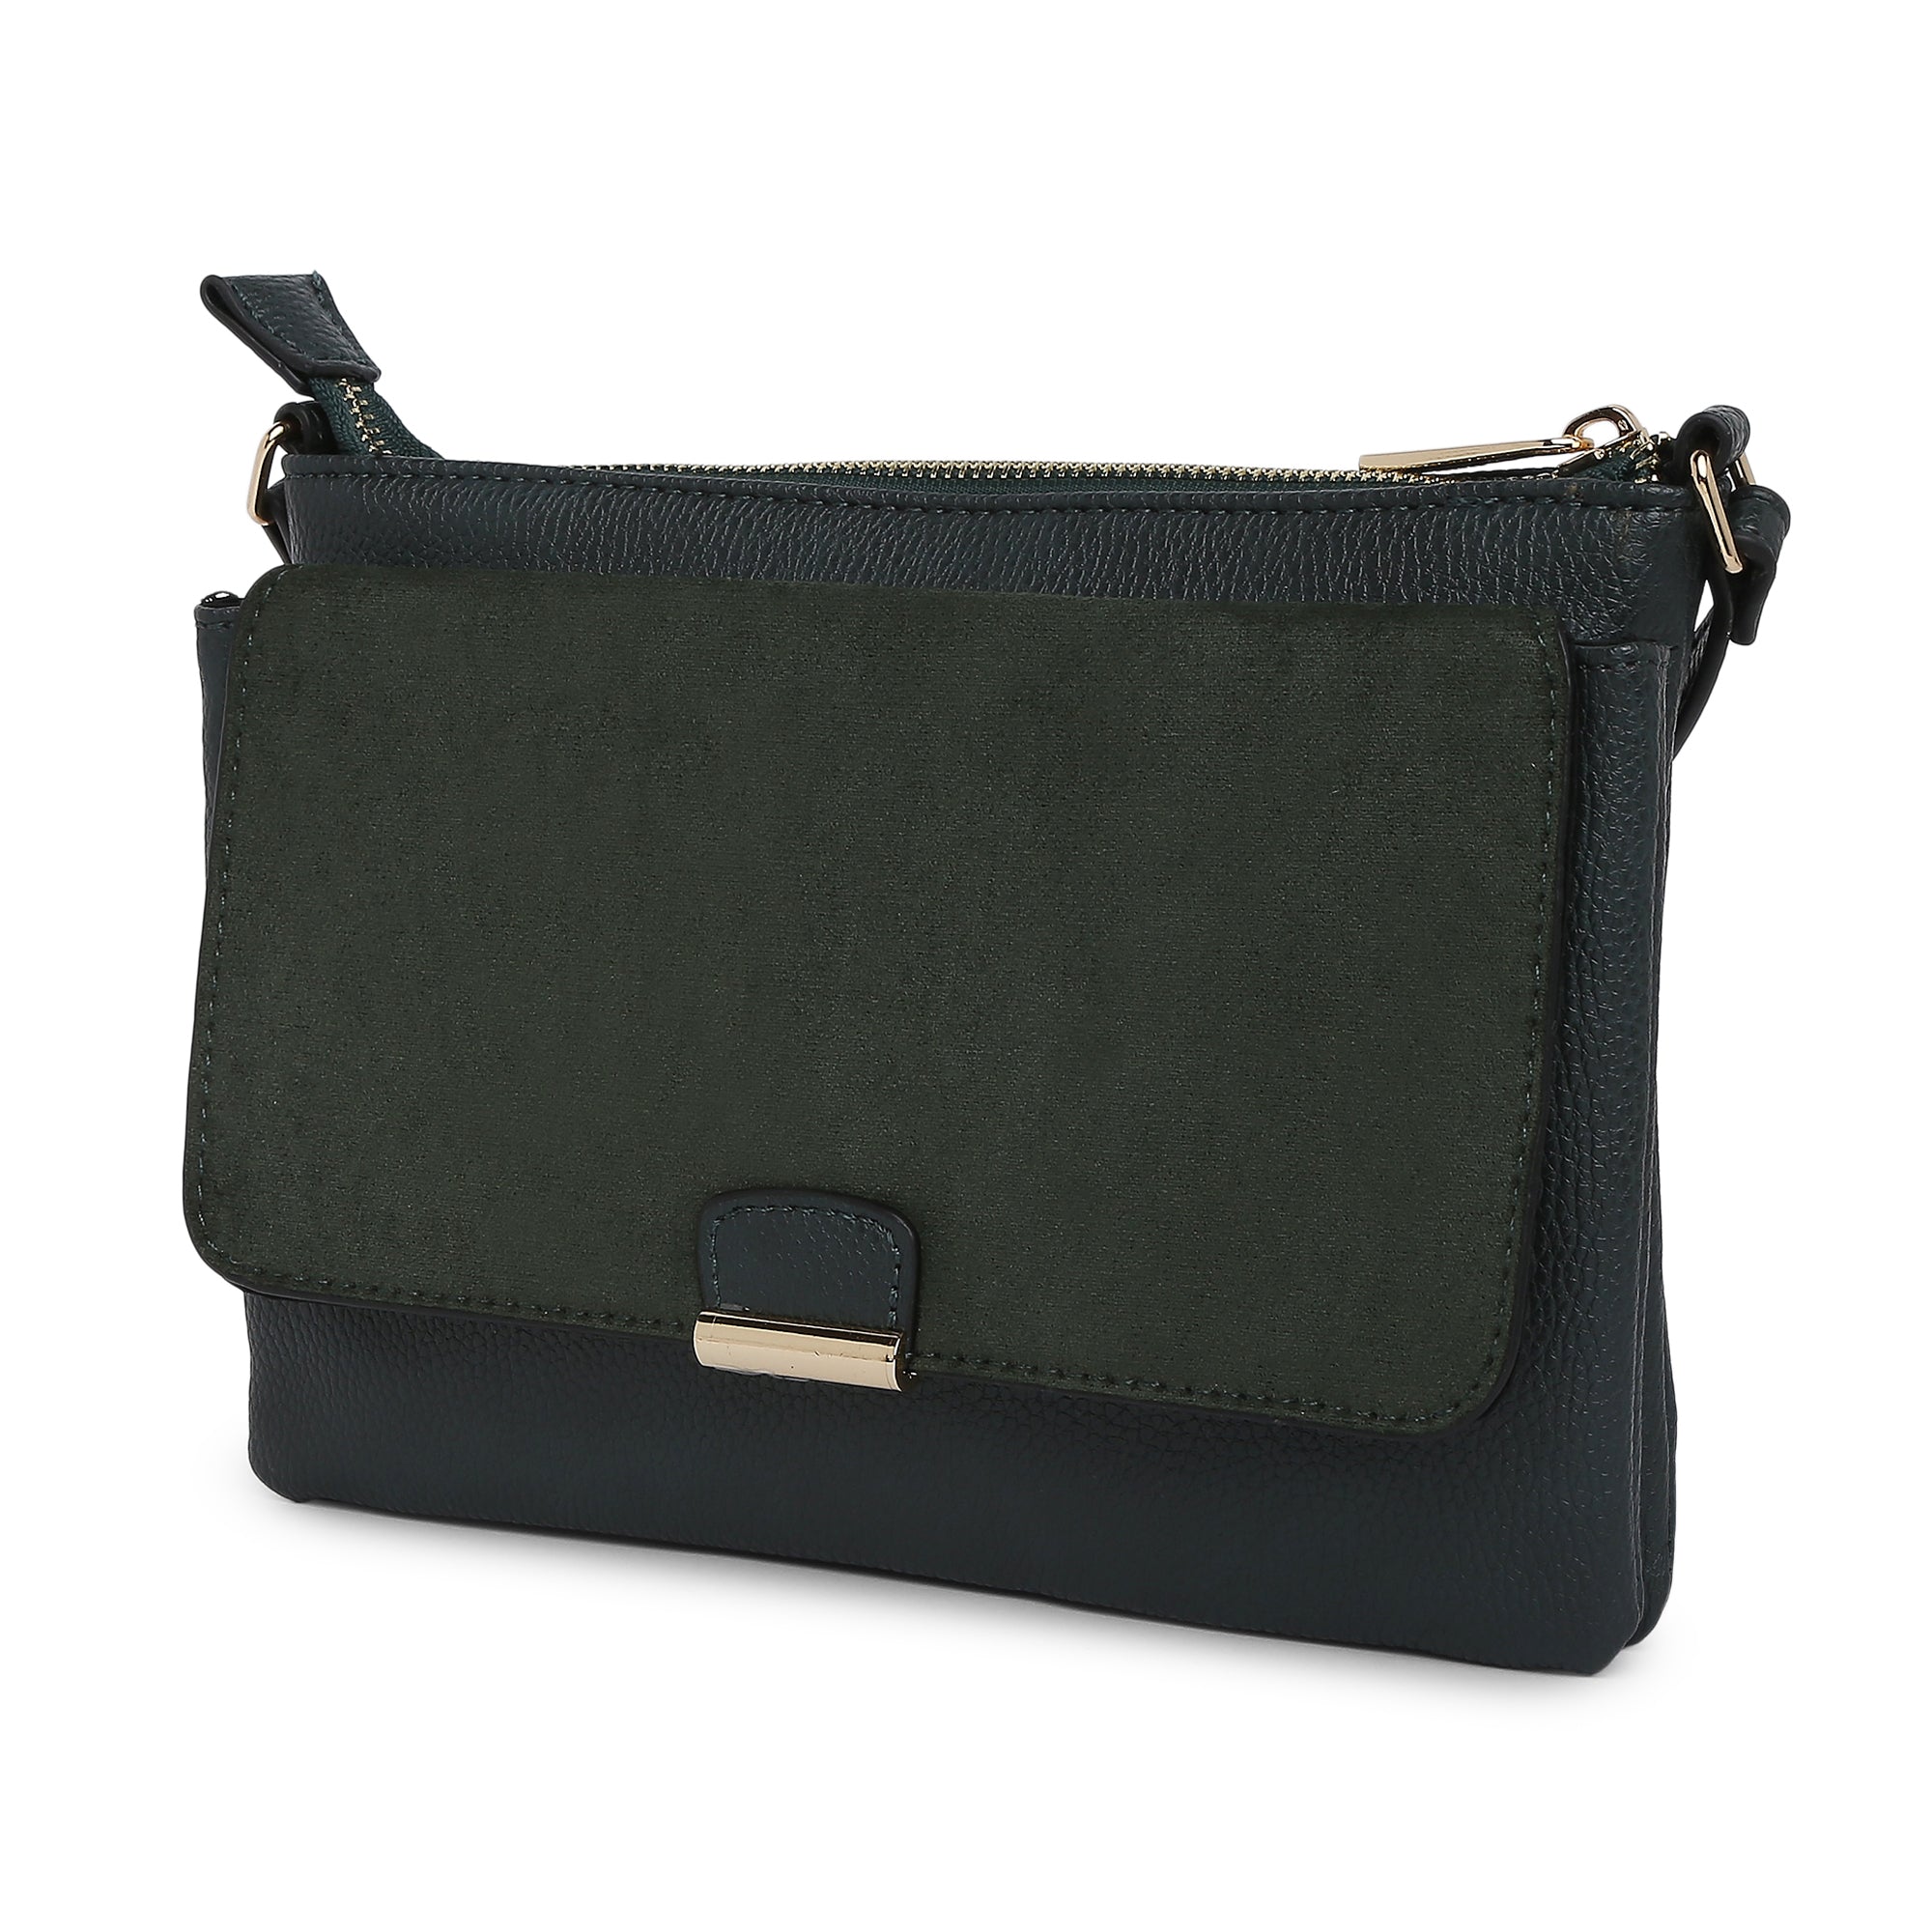 Accessorize London Women's Cassie Green Solid Sling Bag